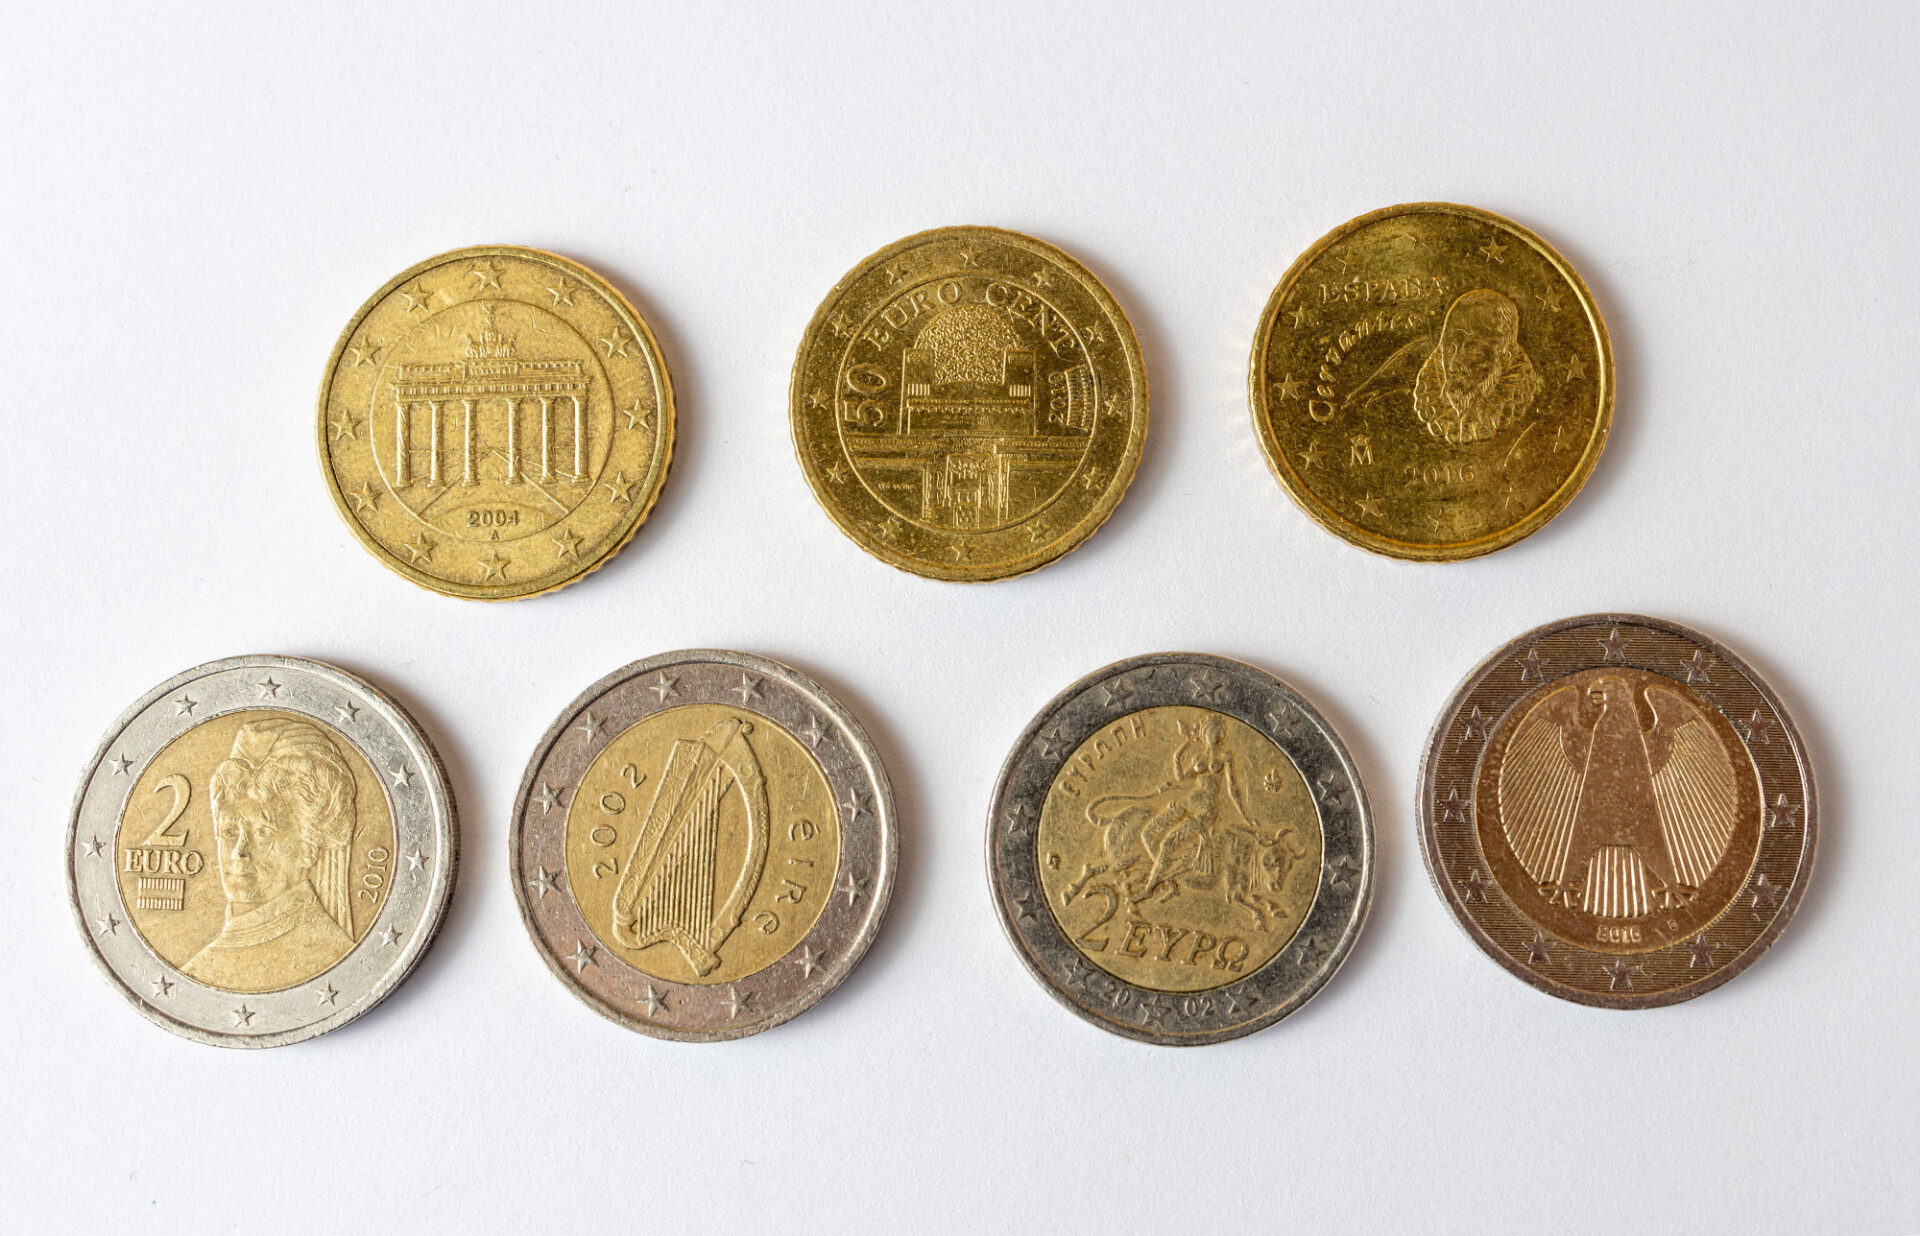 Euro coins from different member states